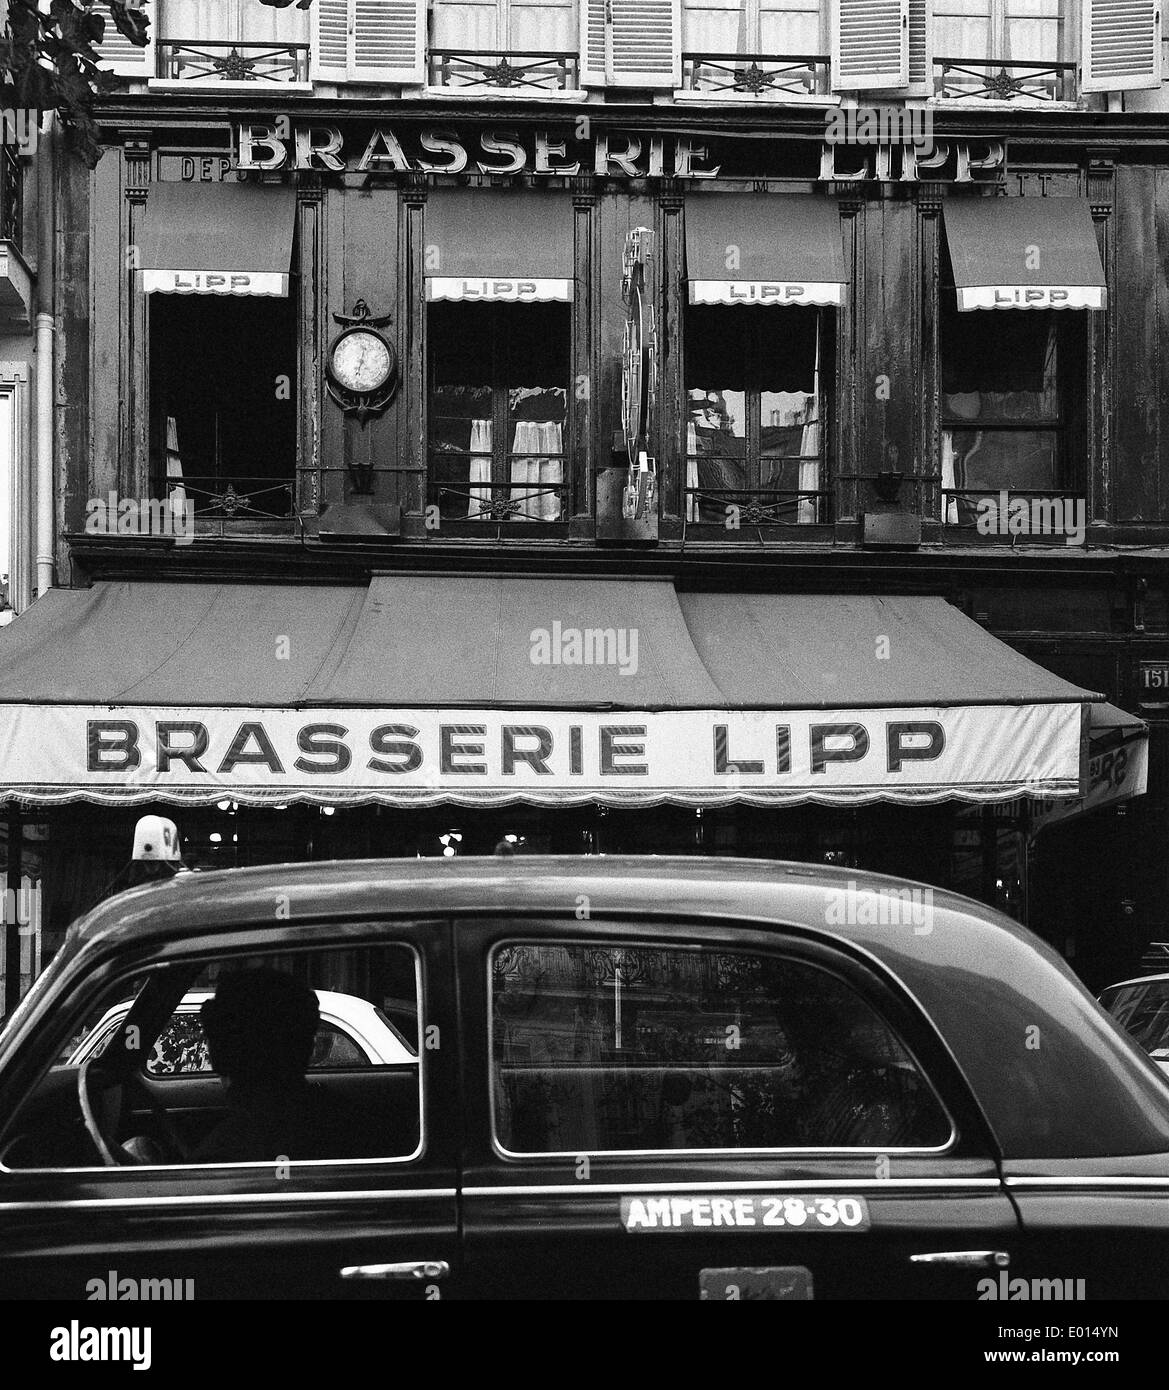 Brasserie lipp Black and White Stock Photos & Images - Alamy